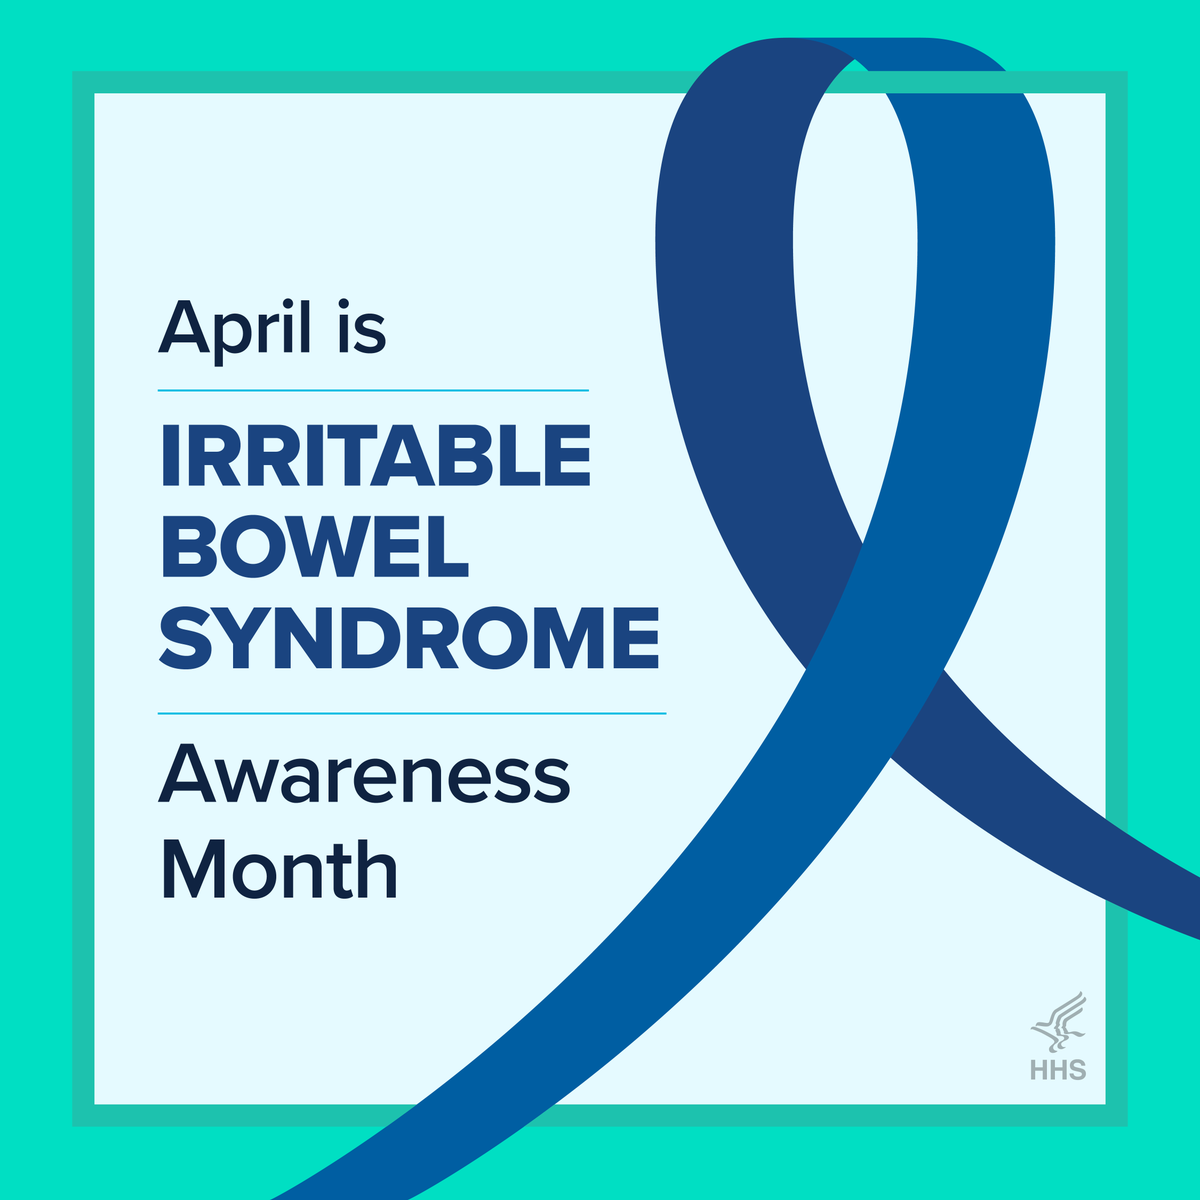 Living with Irritable Bowel Syndrome (IBS) is challenging, but knowing its treatment options is key. This #IBSAwarenessMonth, talk to your doctor if you experience pain in your abdomen, bloating, or changes in bowel movements. 

Learn more from @NIH: bit.ly/49AwtDT